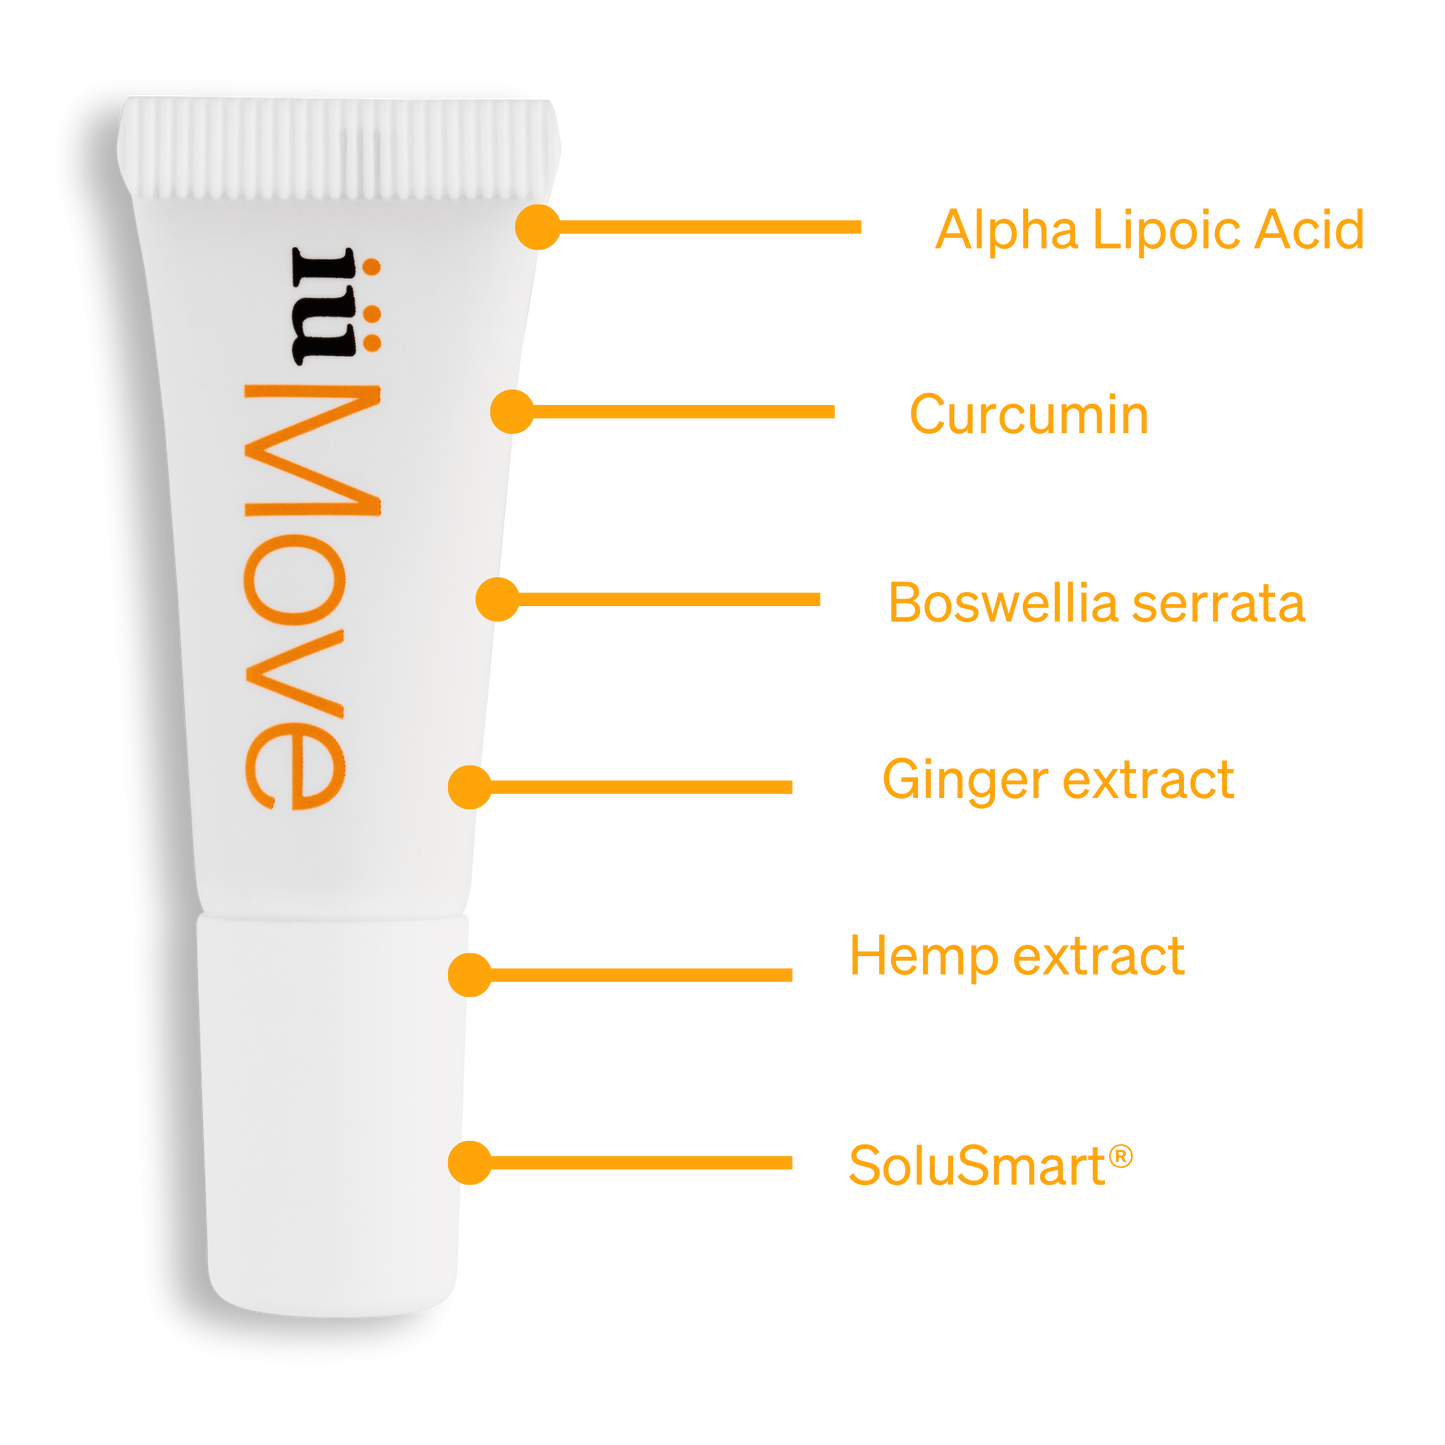 Solute tube ingredients inside supplement iüMove from iüLabs, joint health support supplement, curcumin, boswellia serrata, ginger extract, hemp extract and SoluSmart®, iuMove, iuLabs